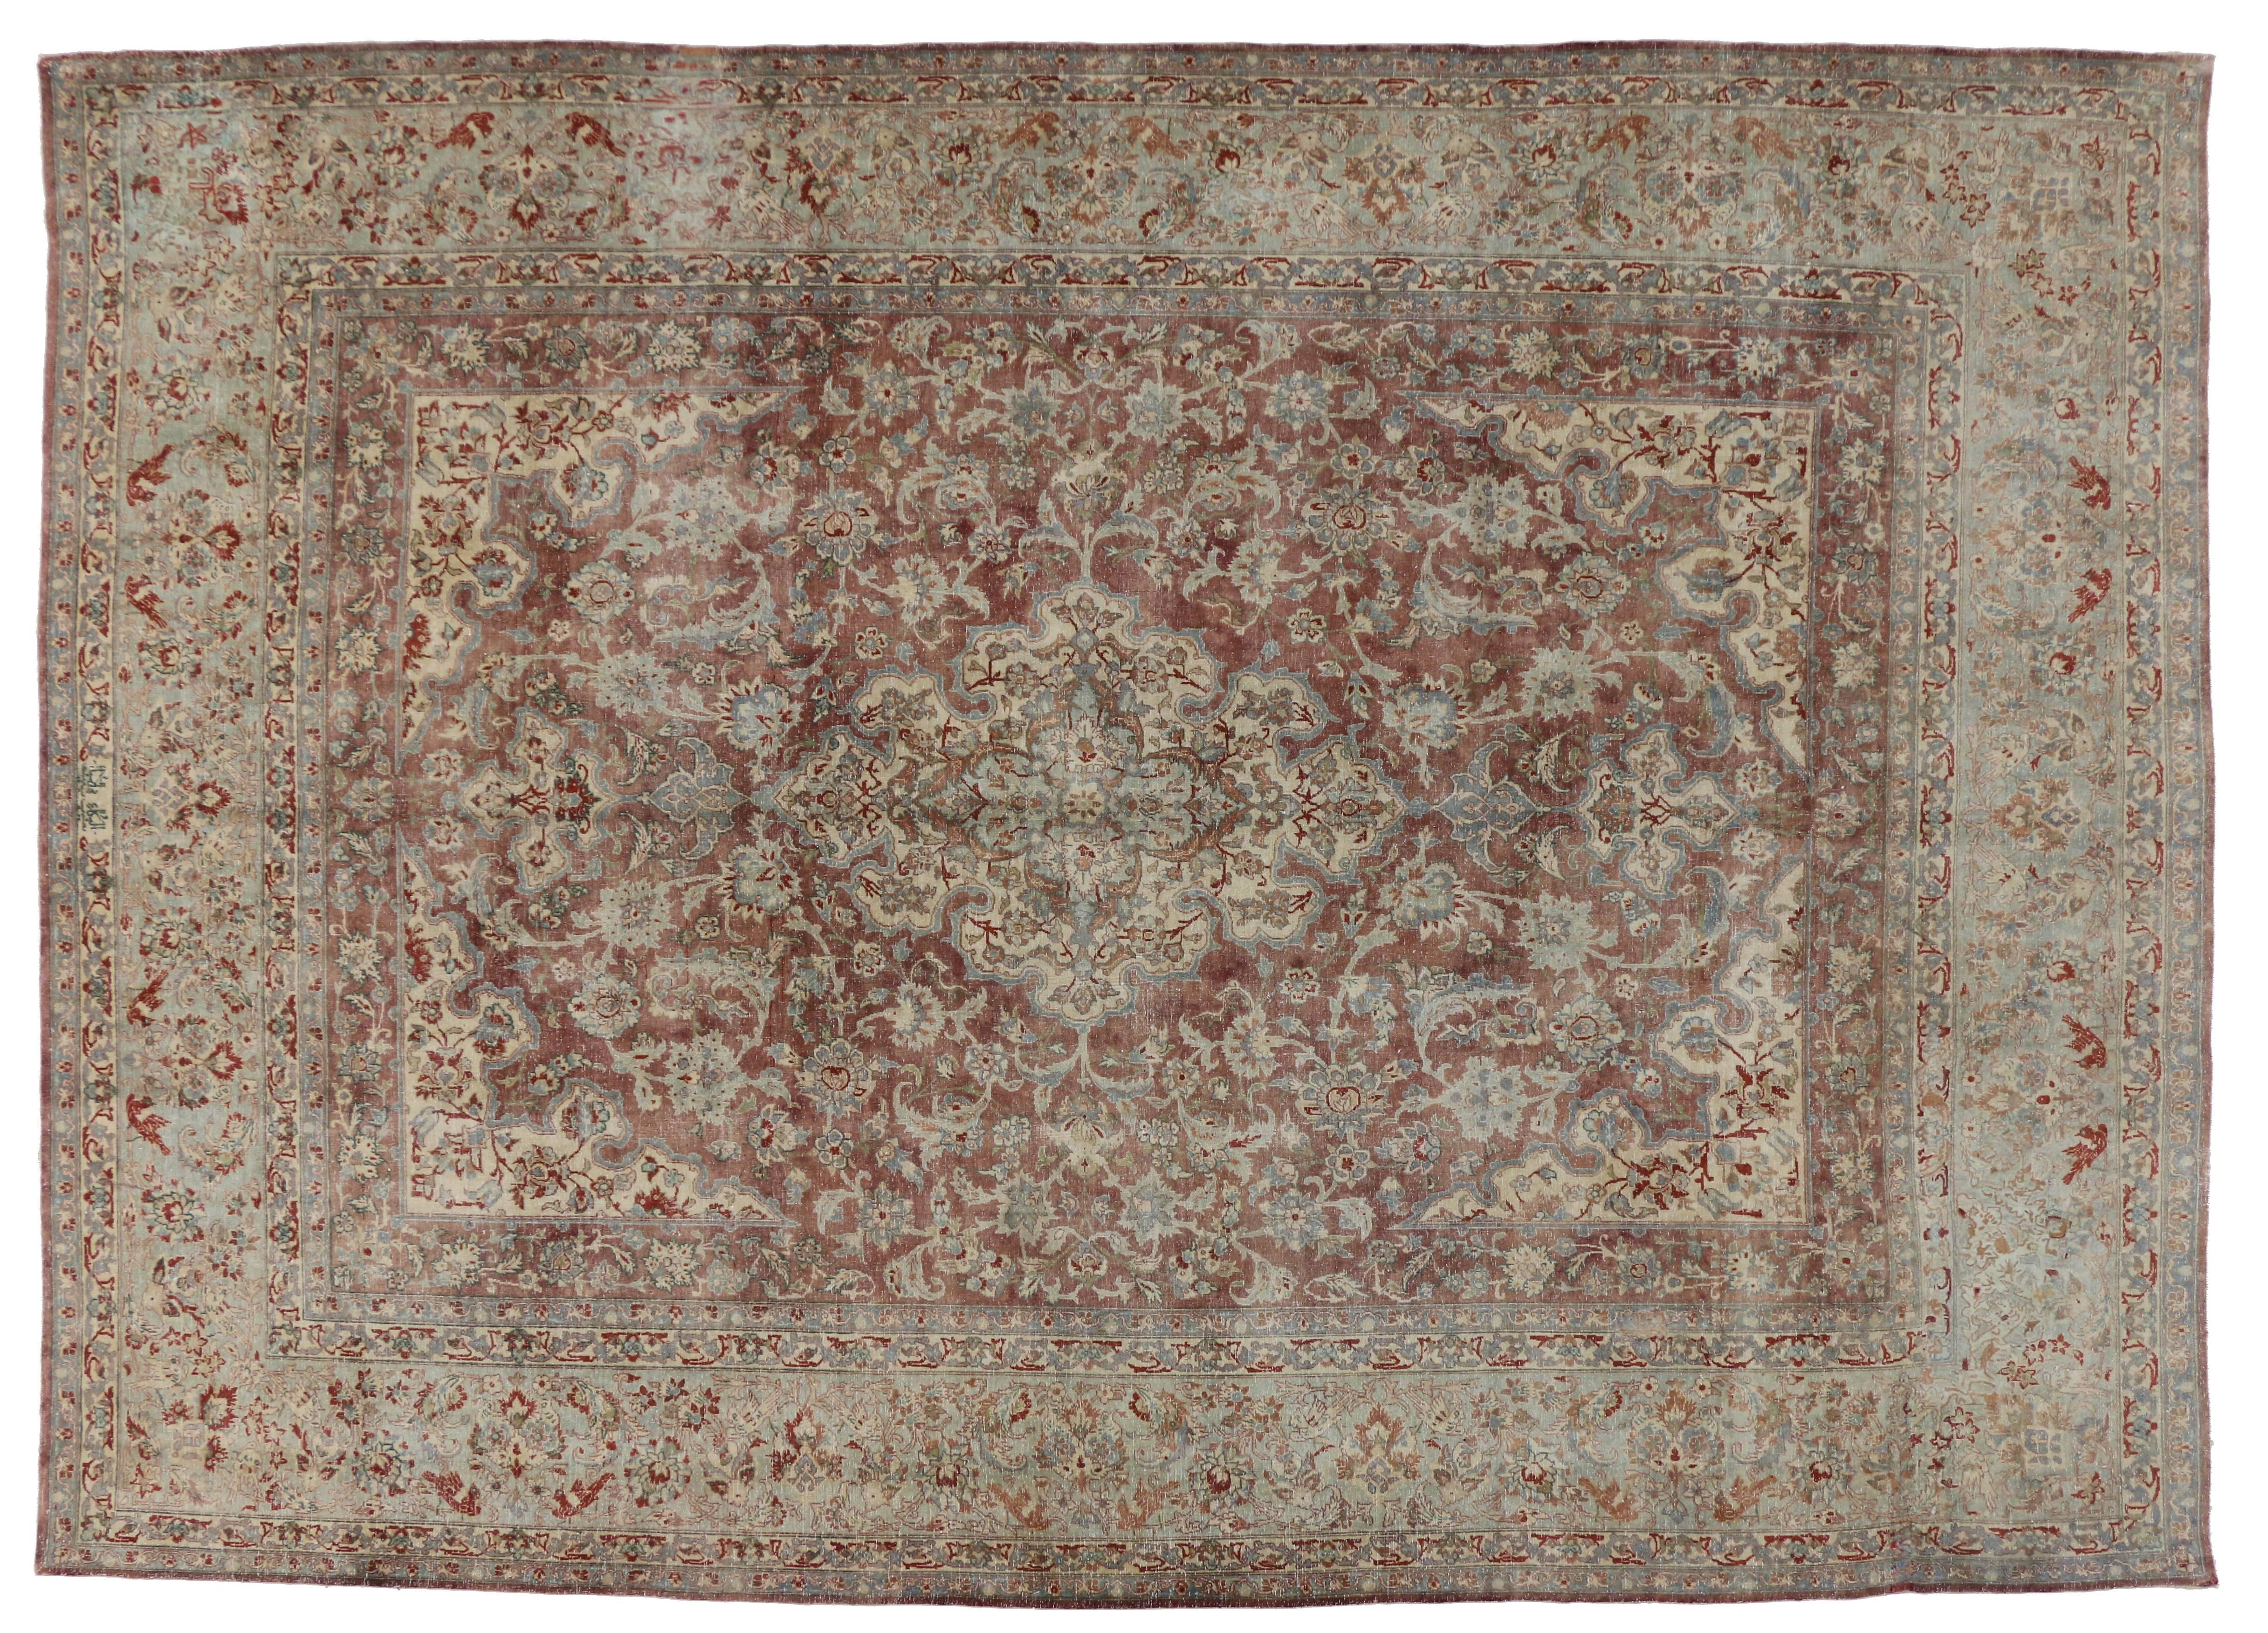 Hand-Knotted Distressed Antique Persian Kerman Rug, Industrial Style Kirman Area Rug